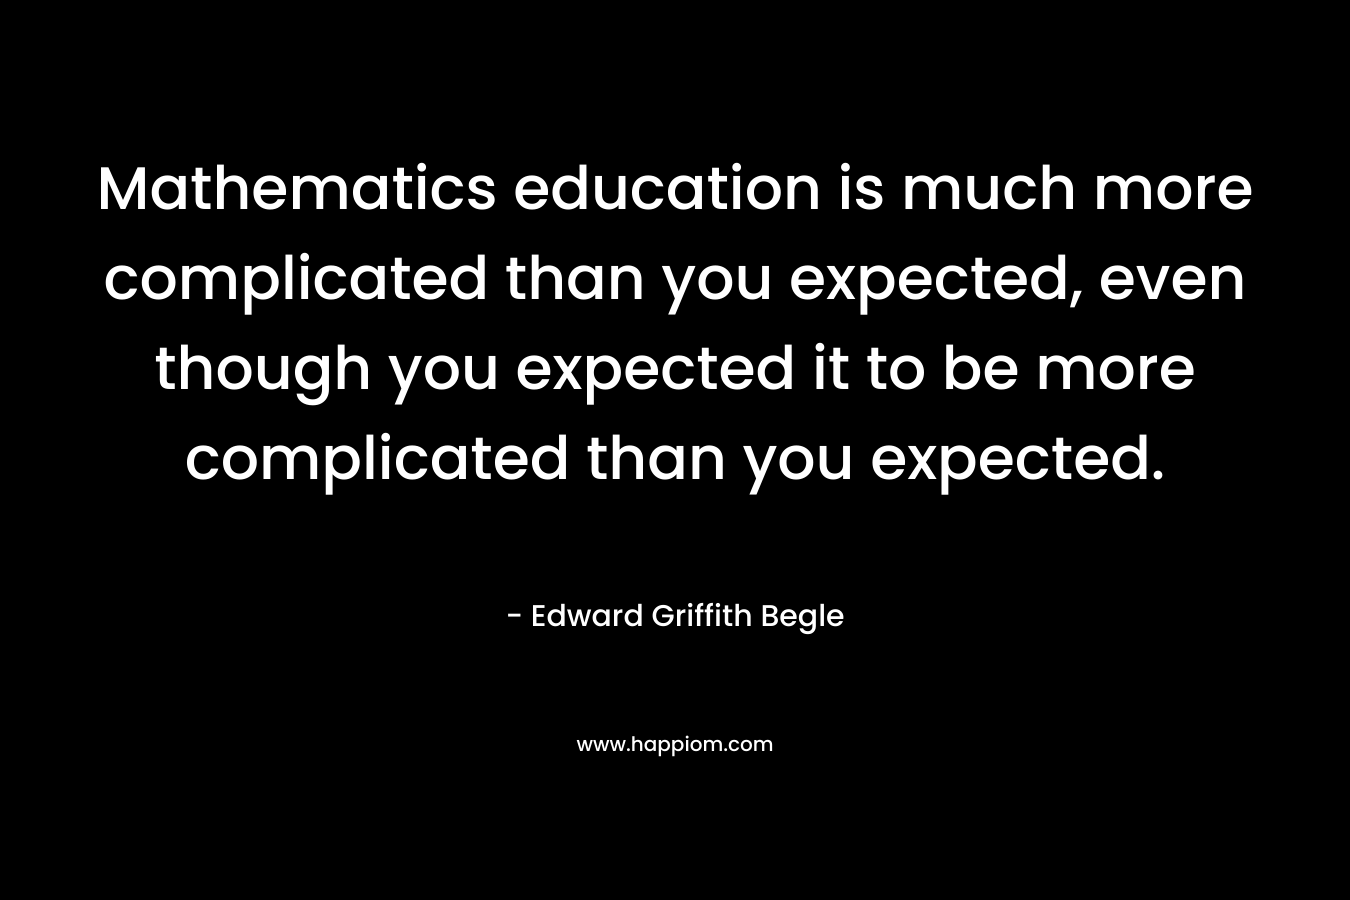 Mathematics education is much more complicated than you expected, even though you expected it to be more complicated than you expected.